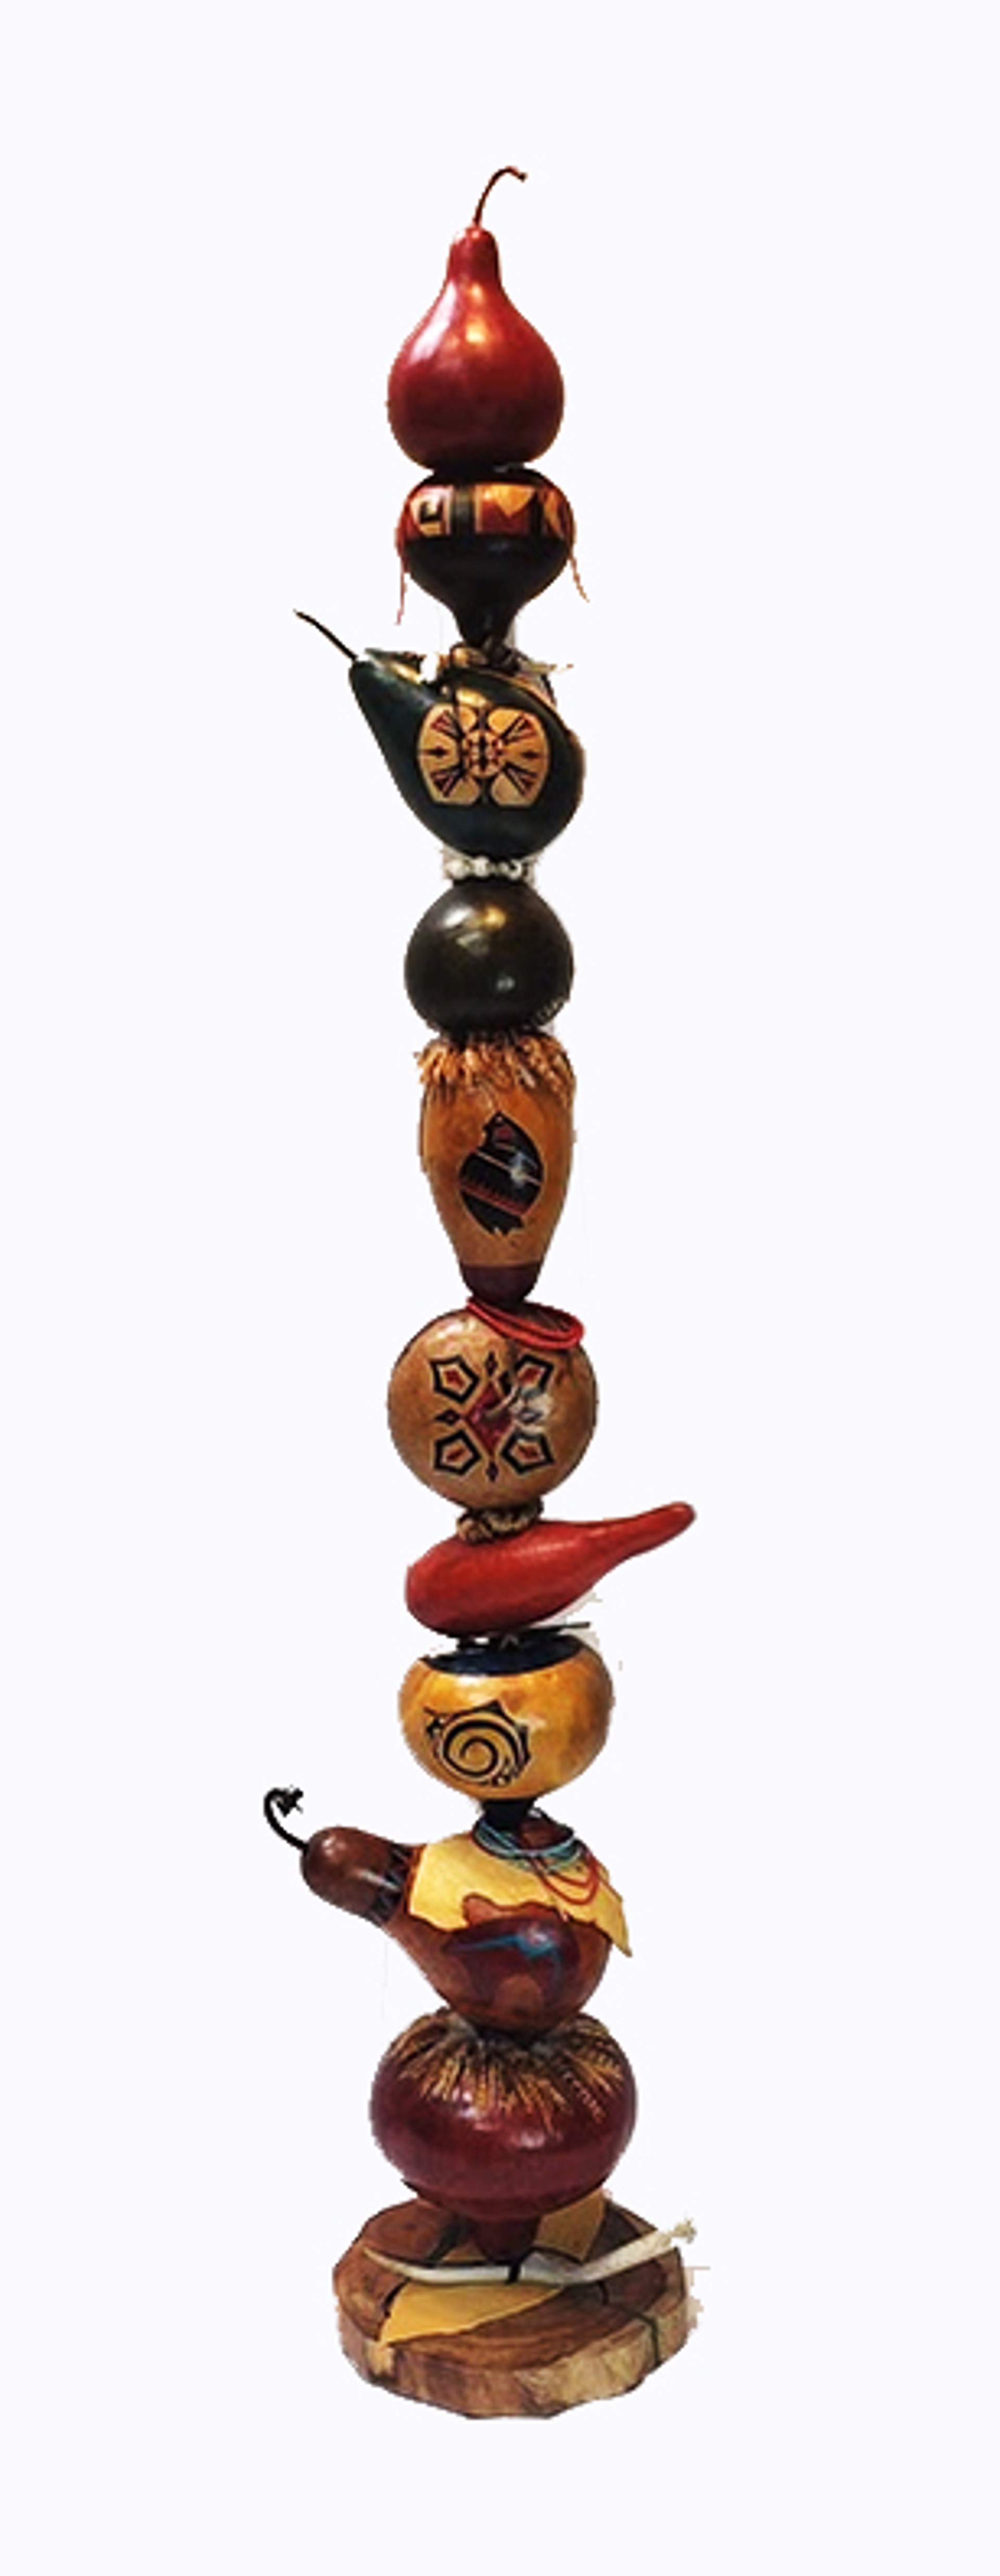 Quail Totem ~ Handpainted Gourds with Beadwork, Feathers. Porcupine Quills and Leather on Mesquite Stand with Turquoise Inlay by Gary & Glenis Leitch